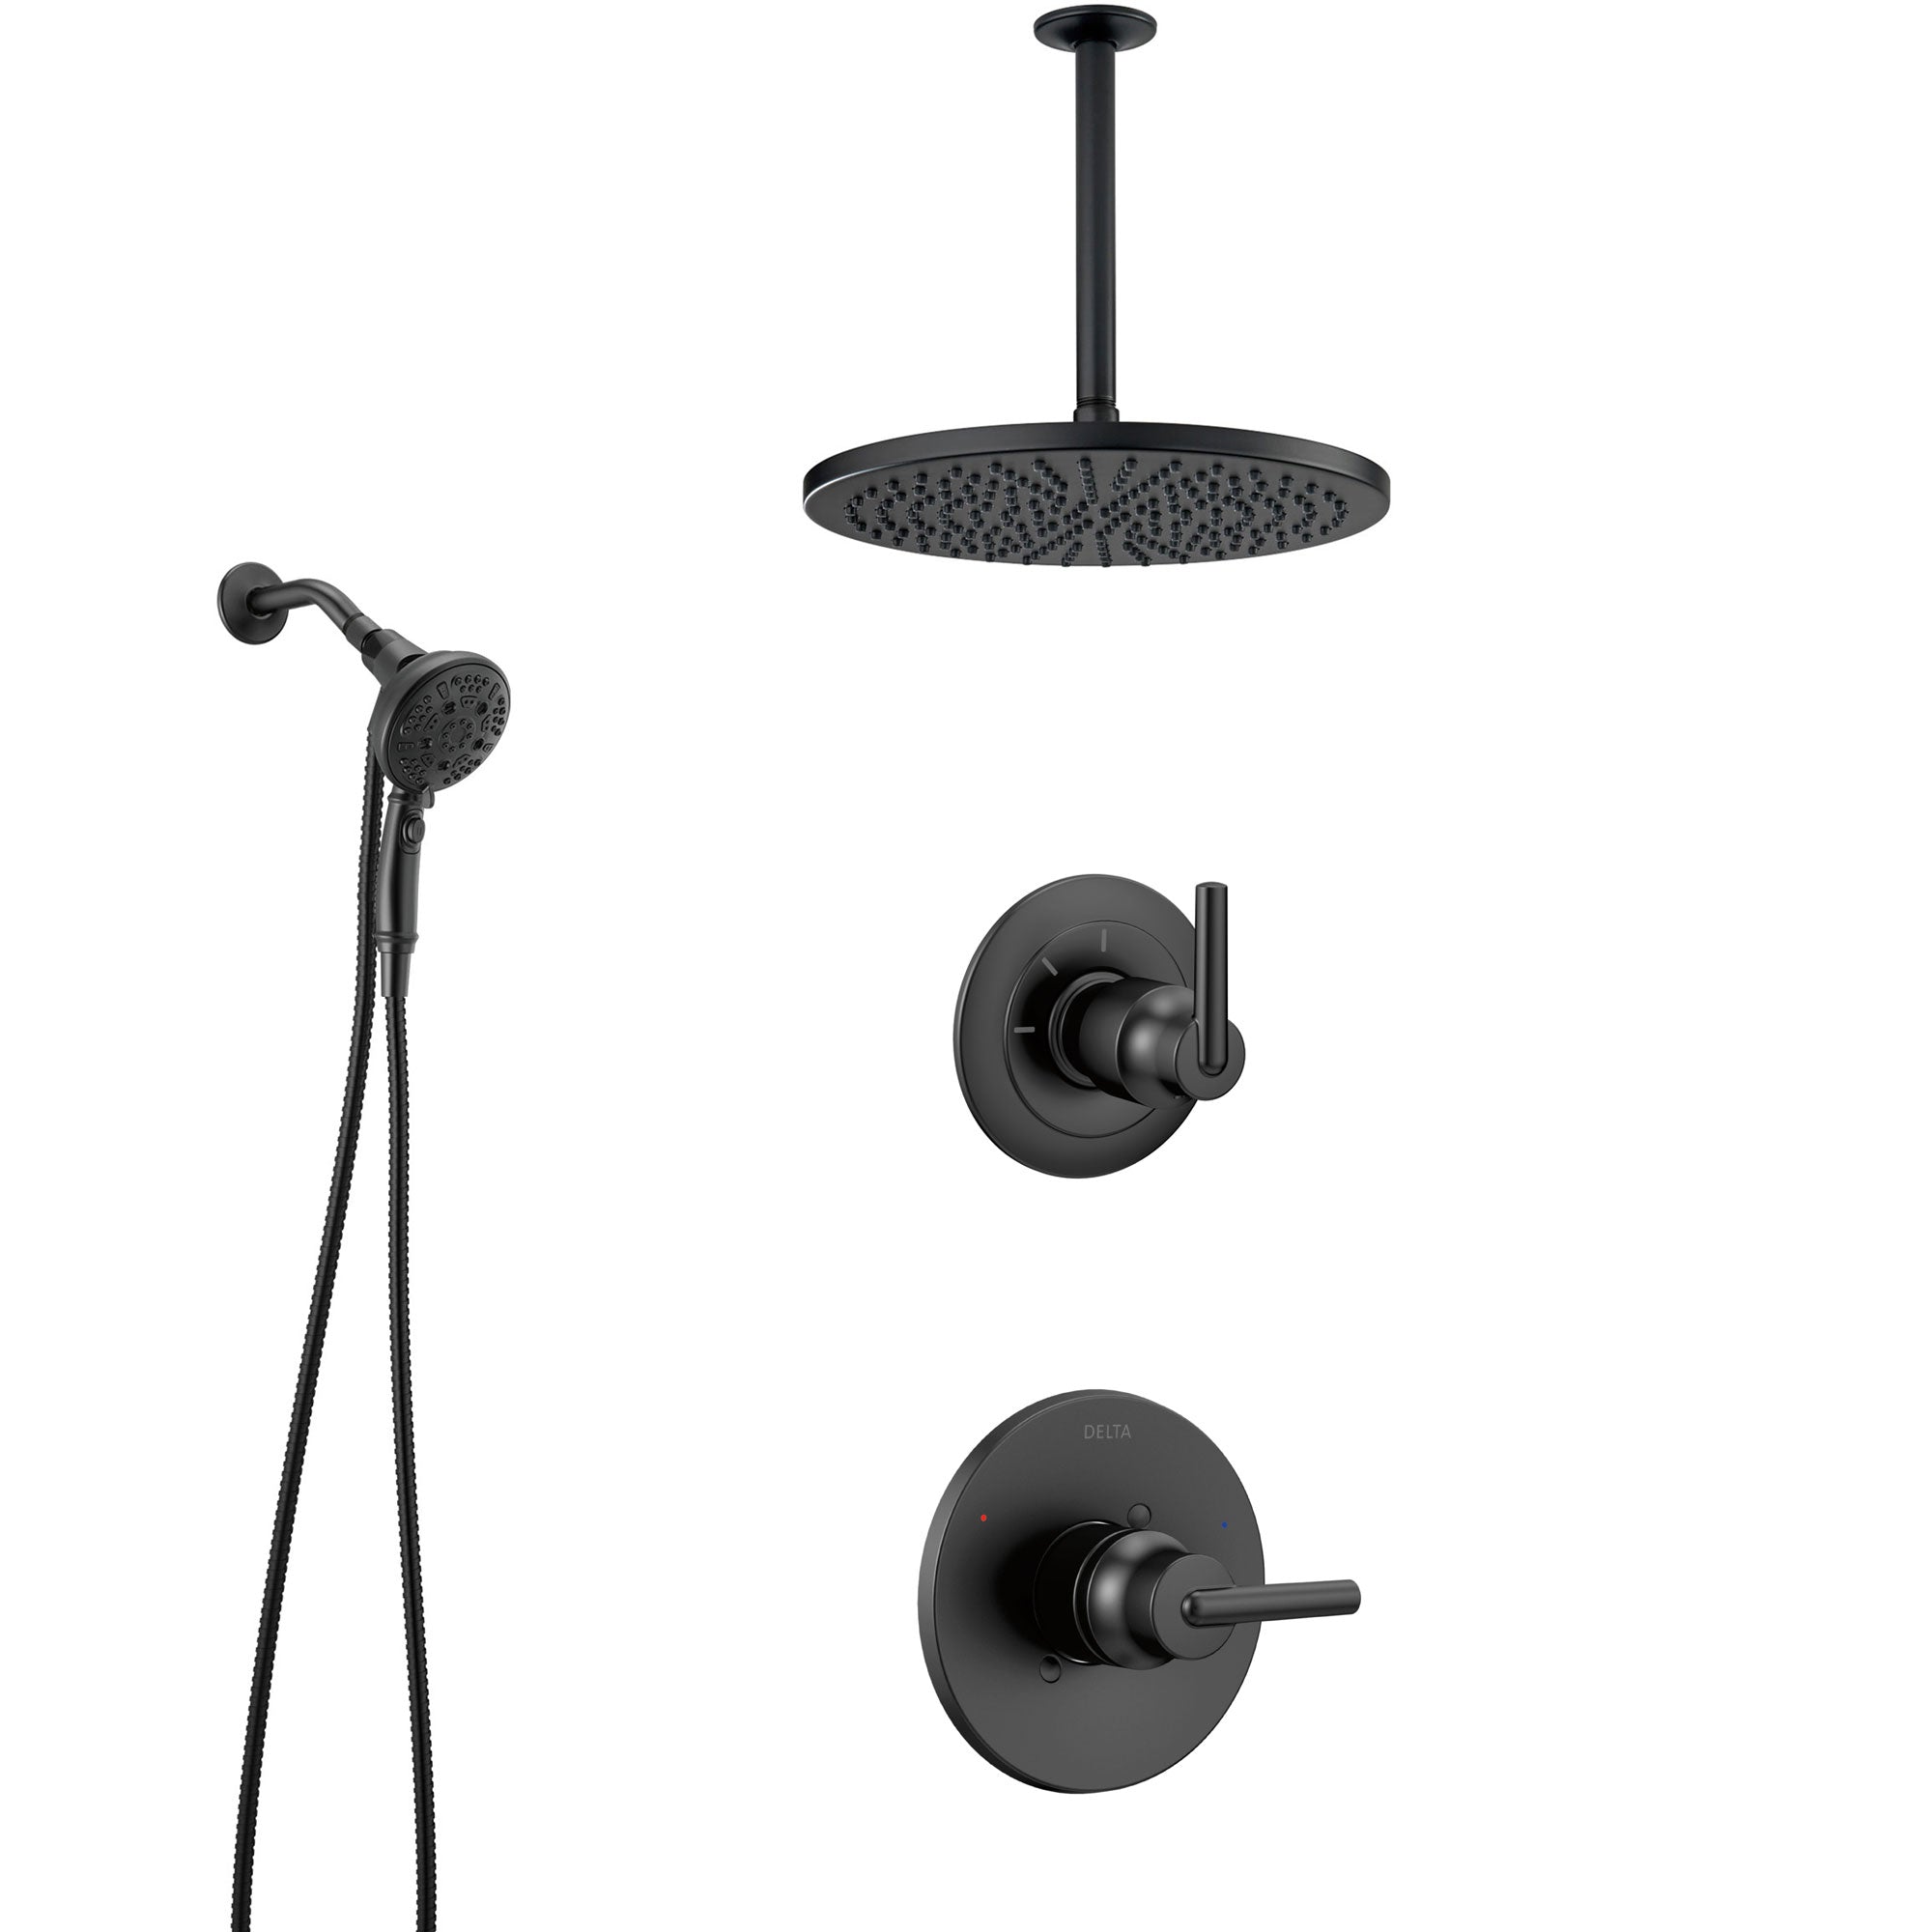 Delta Trinsic Matte Black Finish Modern Shower System and Diverter with Large Round Rain Ceiling Showerhead and SureDock Hand Shower Spray SS1459BL8